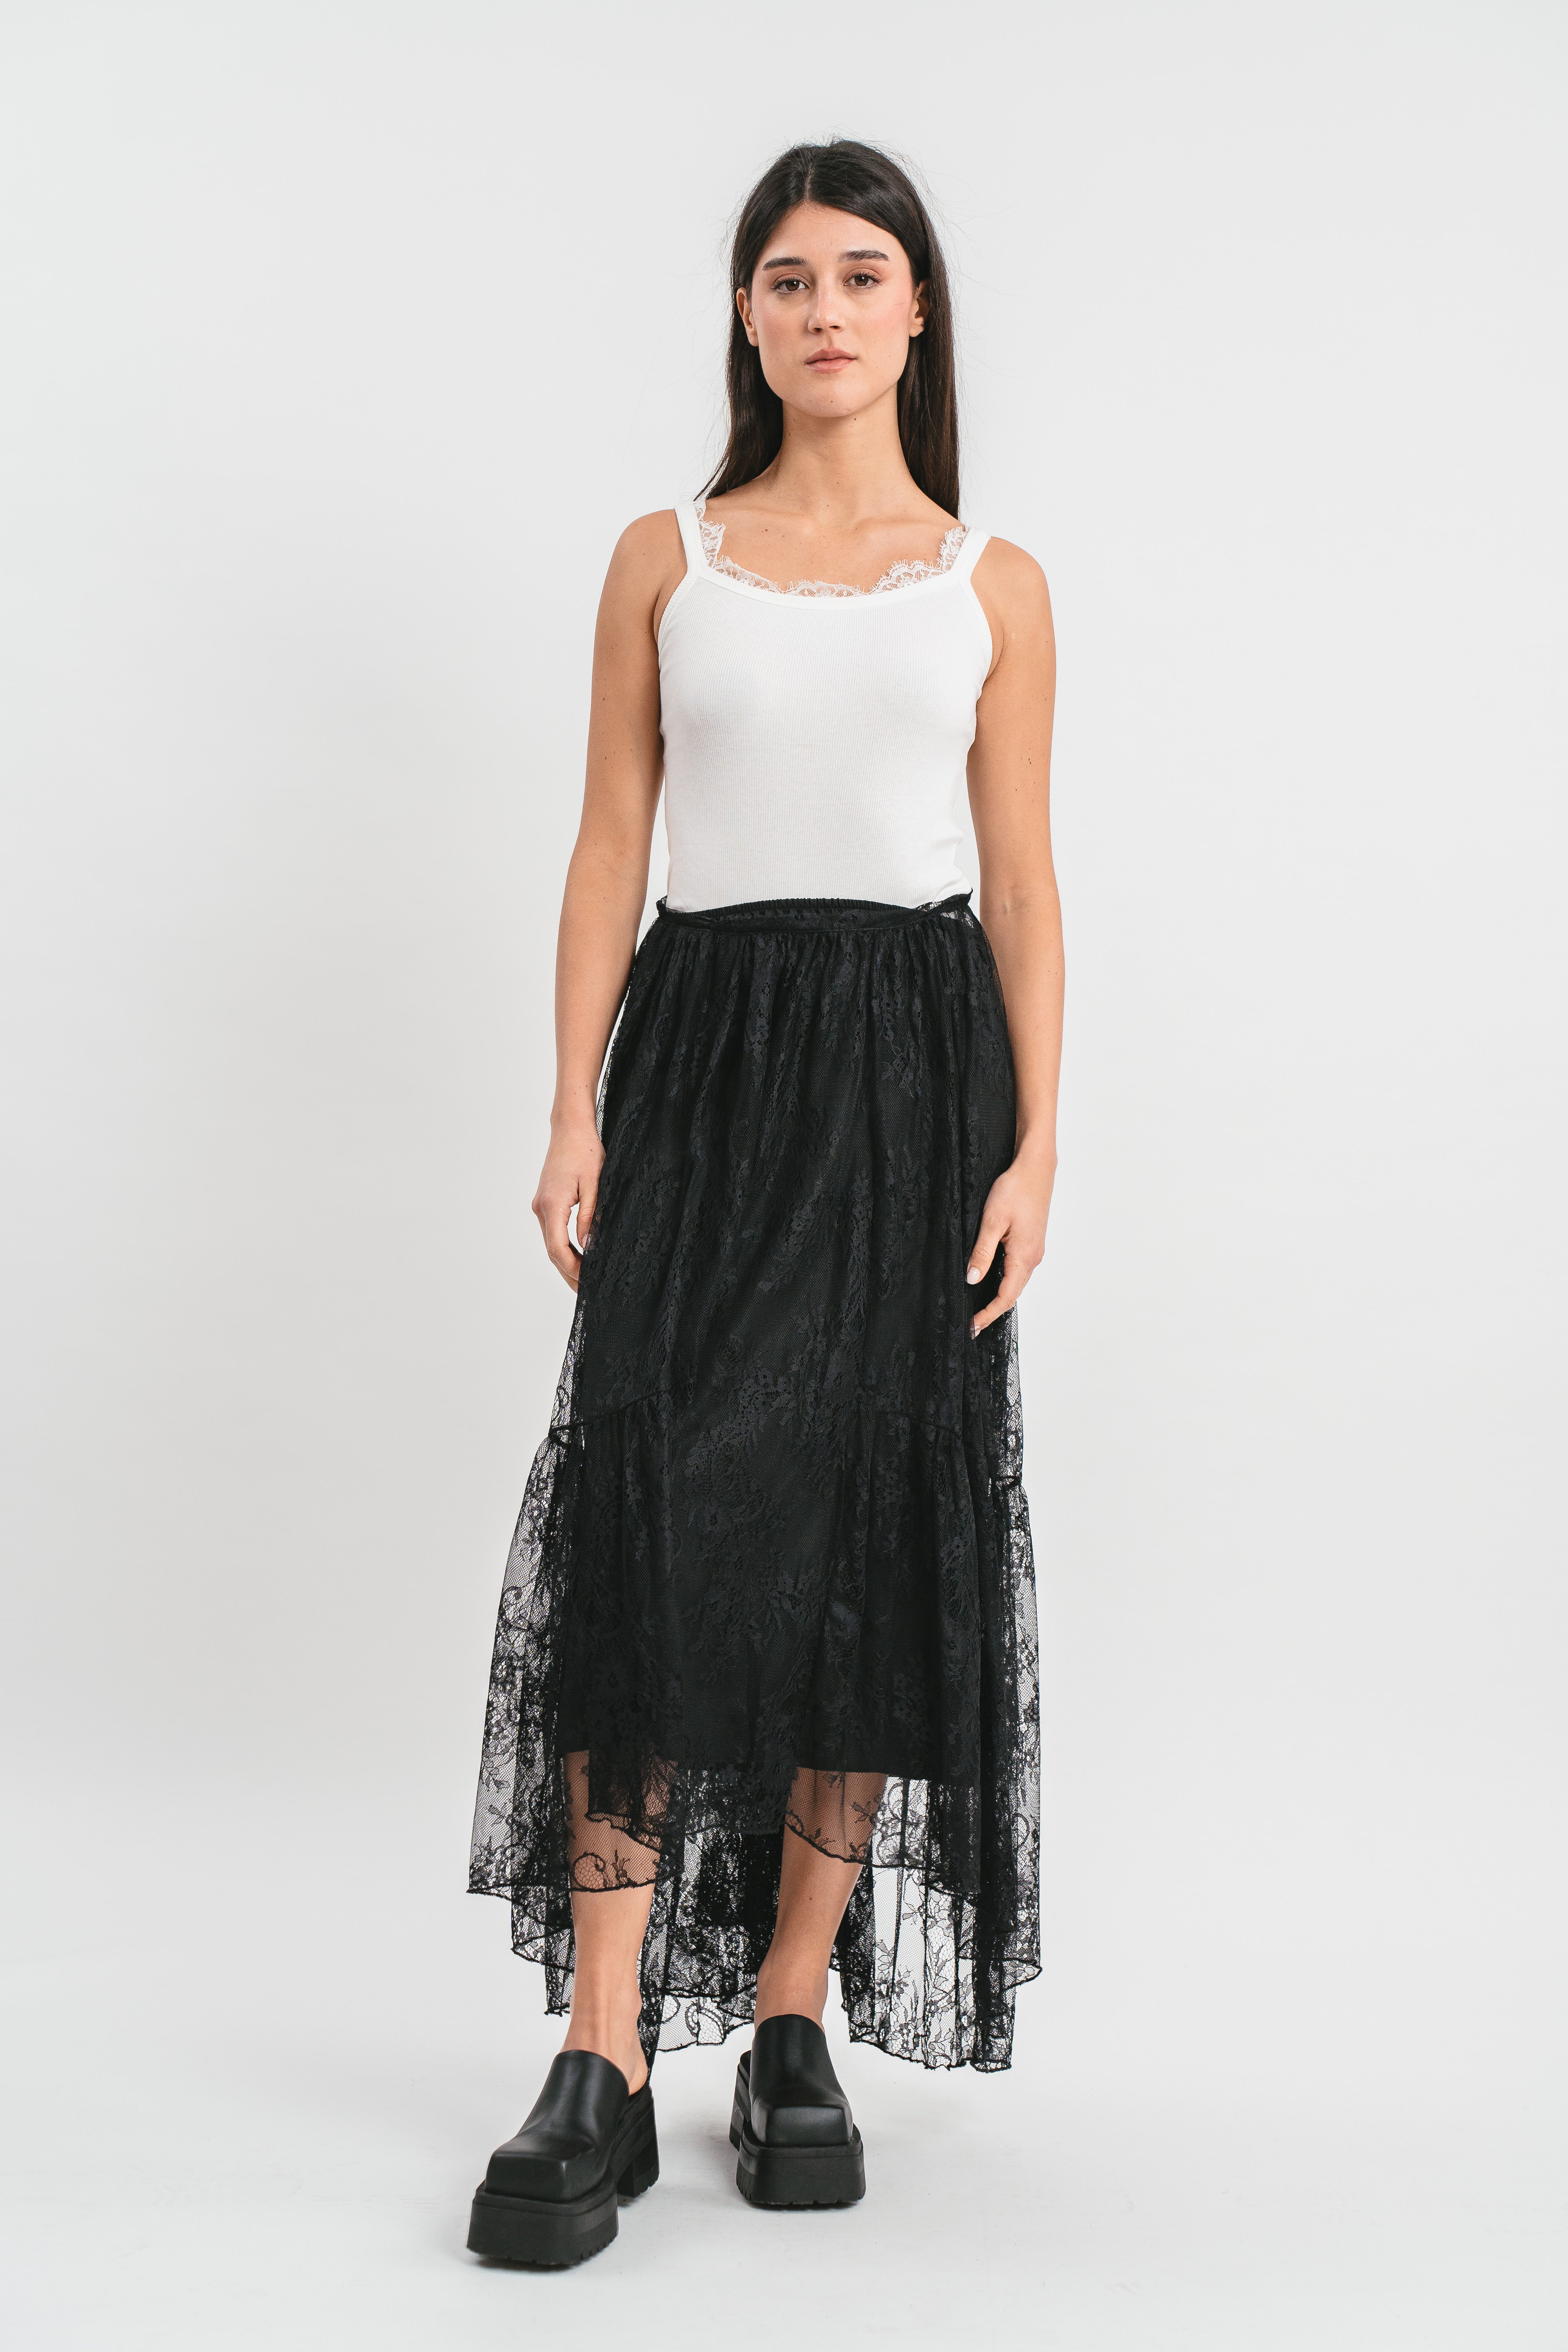 Flounced lace skirt with matching lining